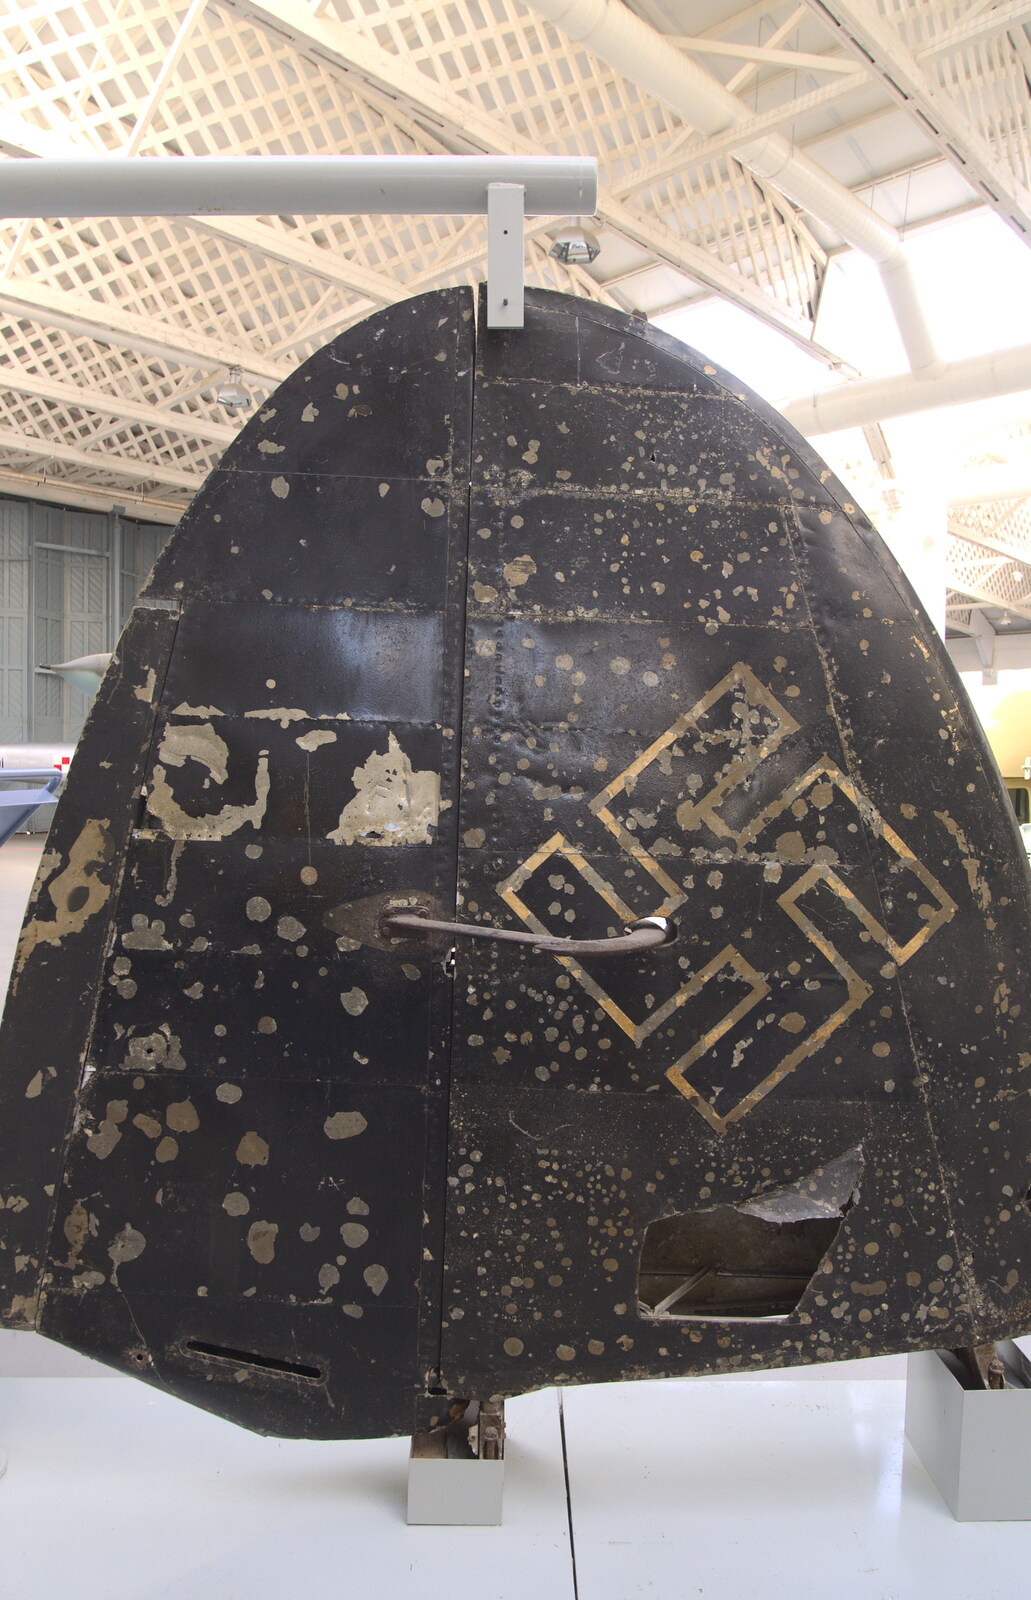 A real bit of Luftwaffe tail from A Day Out at Duxford, Cambridgeshire - 9th March 2014